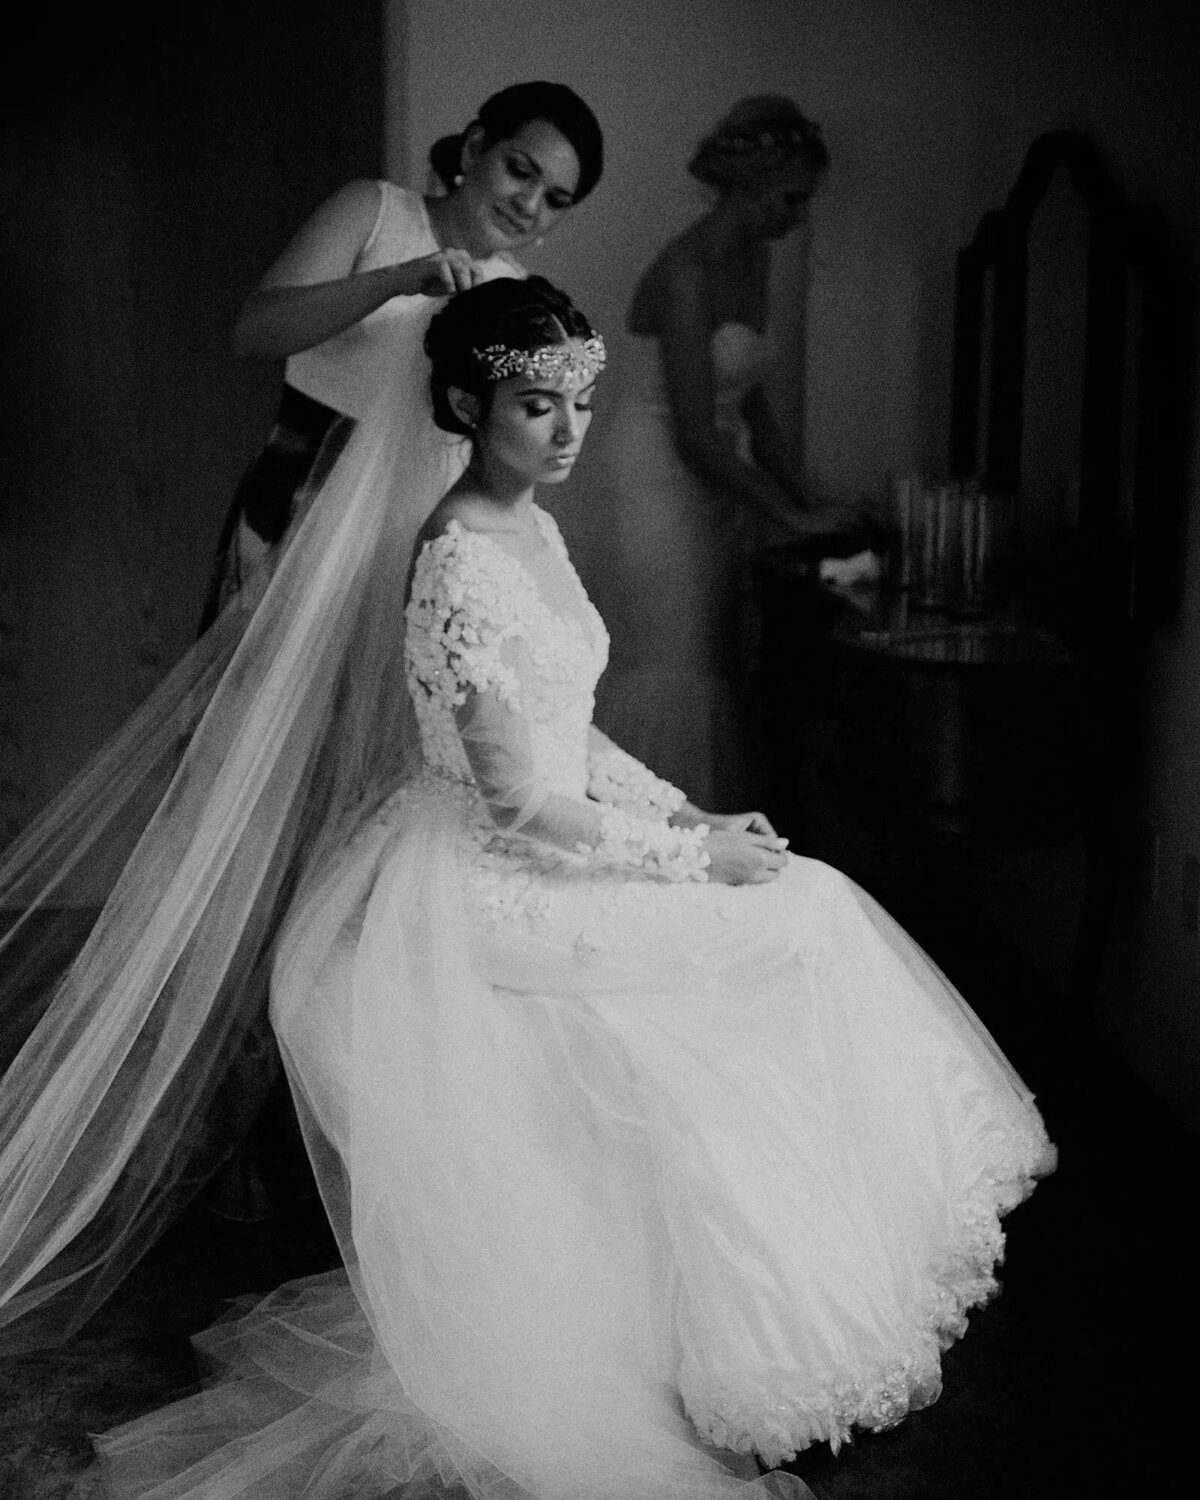 A black and white photograph of a bride seated while another person adjusts her veil